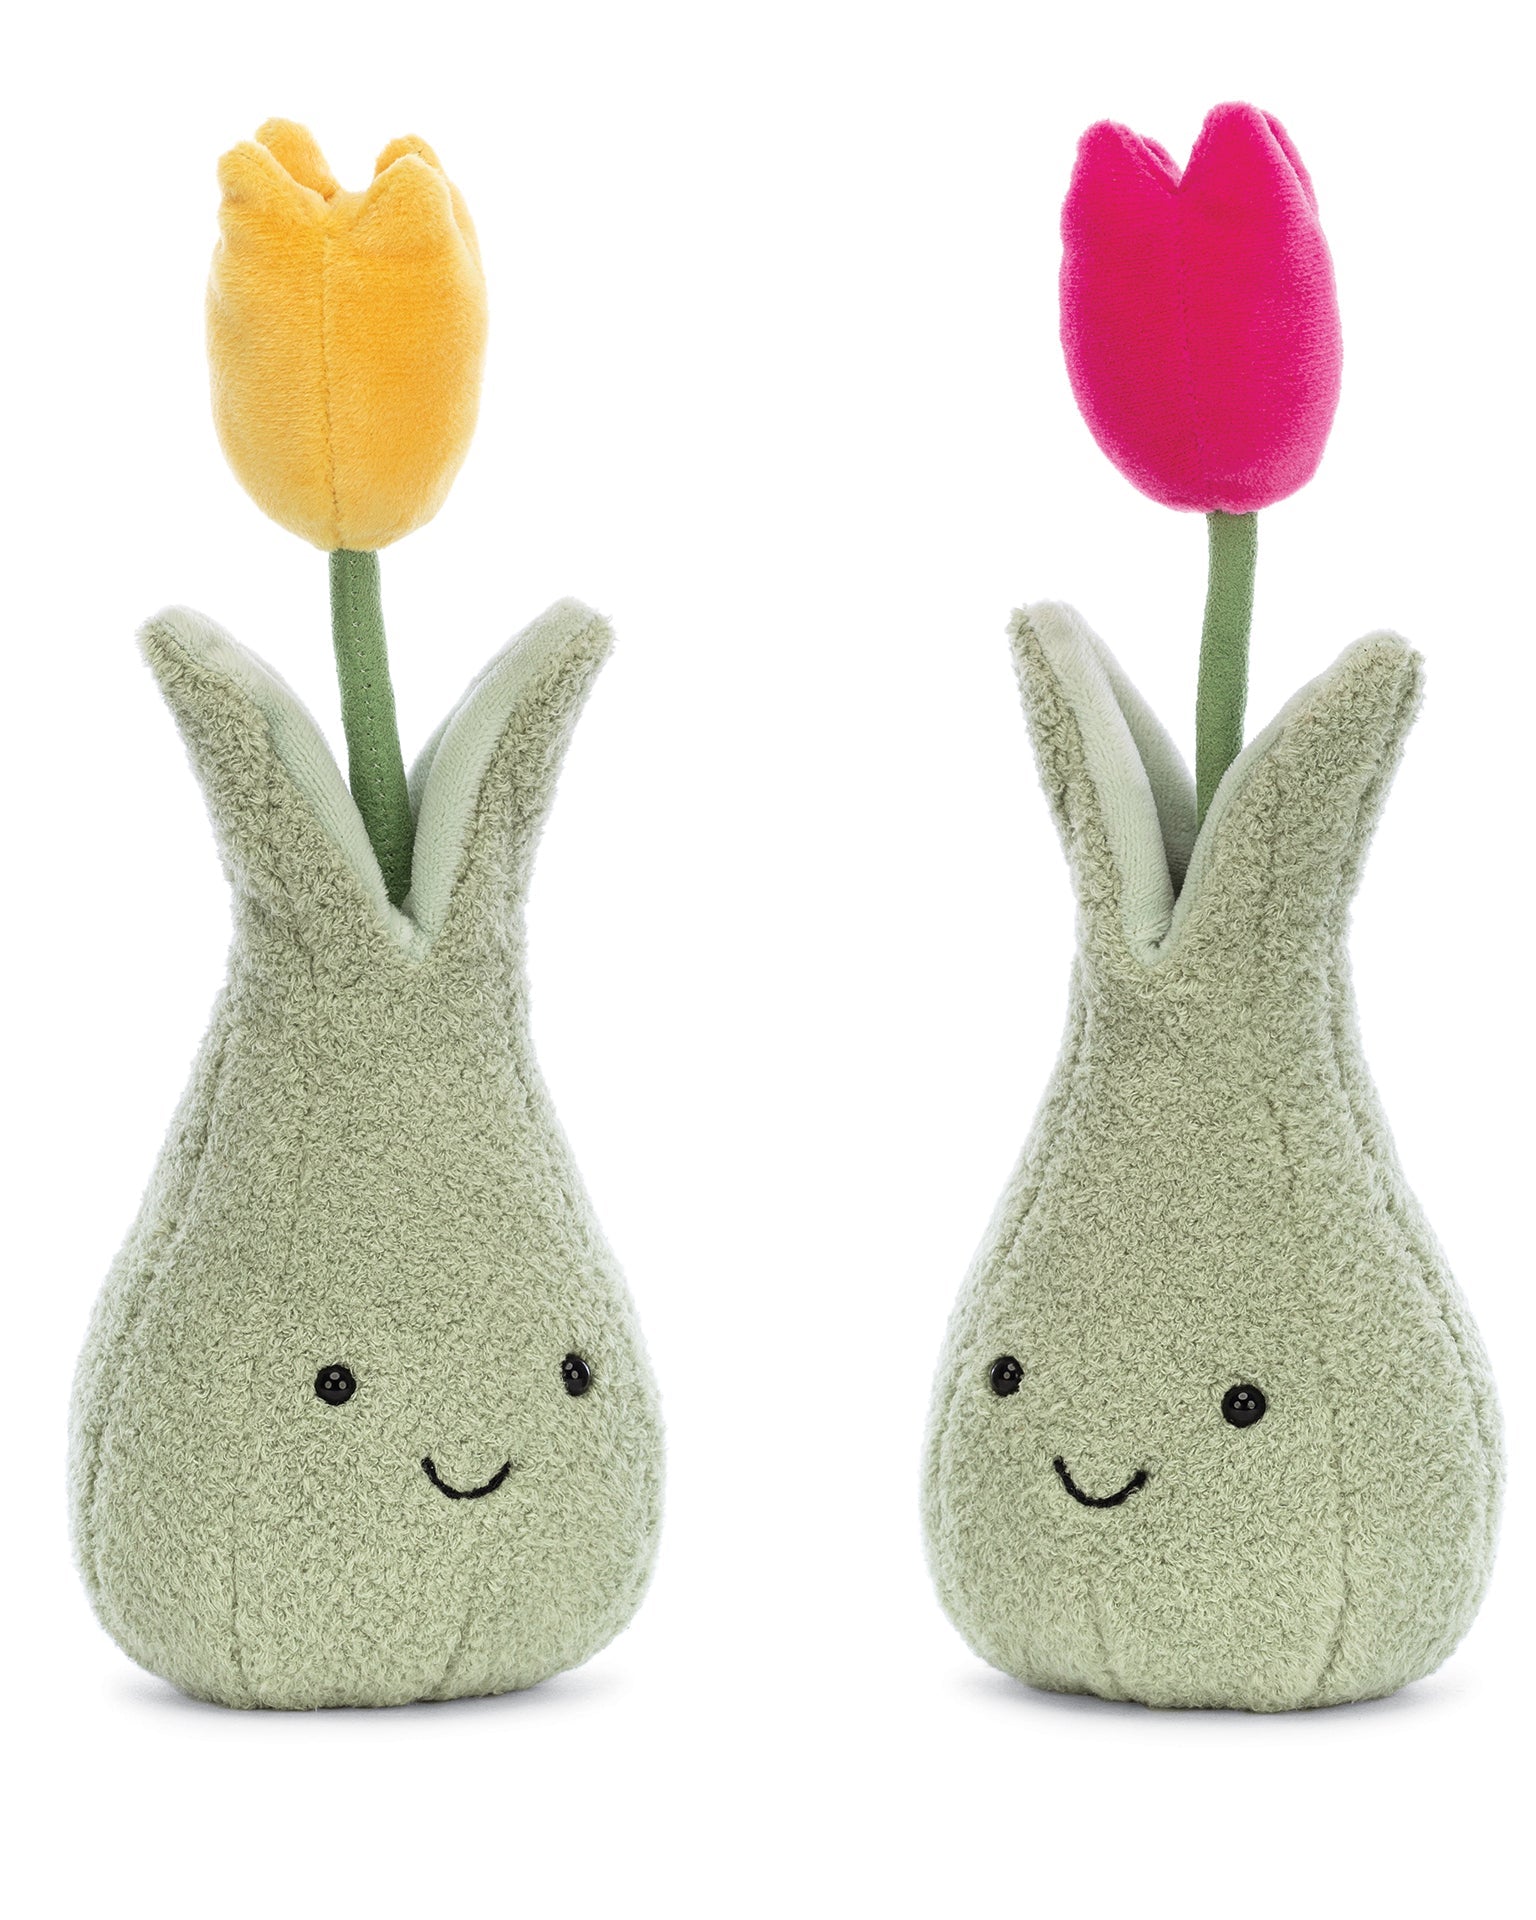 Little jellycat play sweet sprouting fuchsia